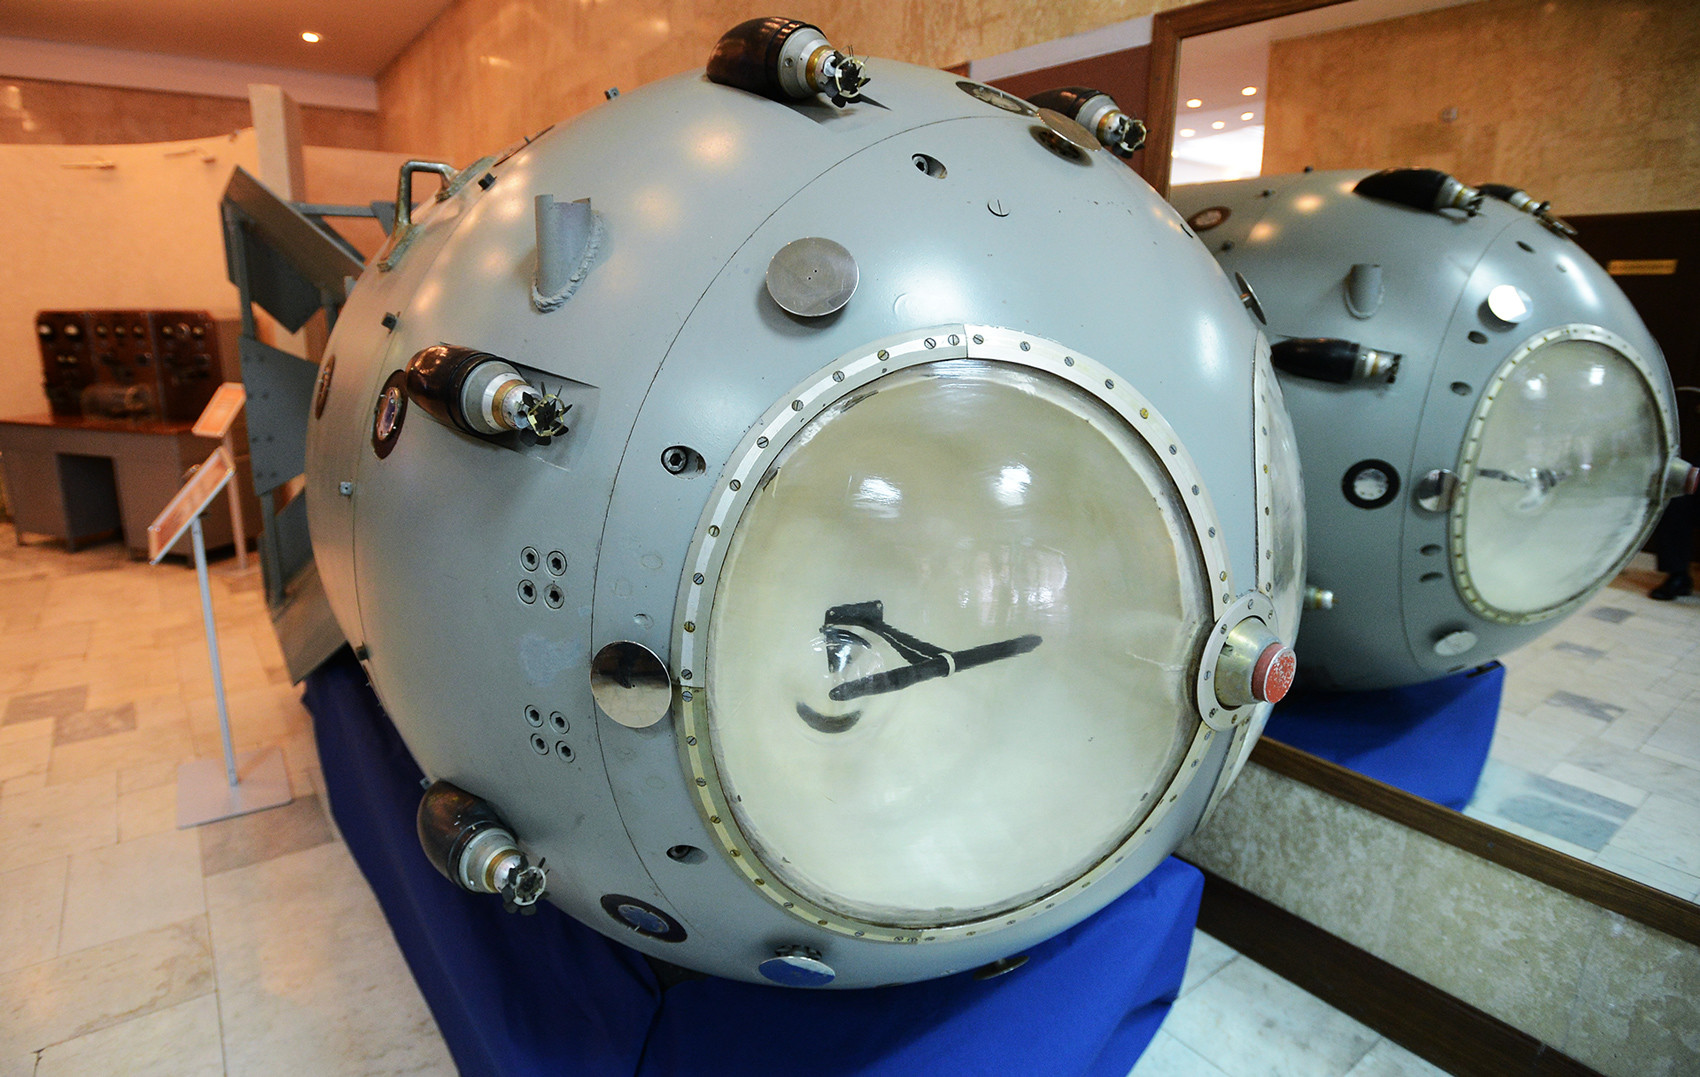 The model of the first Soviet nuclear bomb RDS-01 exhibited at the Russian Federal Nuclear Center – All-Russian Scientific Research Institute of Experimental Physics (RFNC-VNIIEF)  in Russia's Sarov.